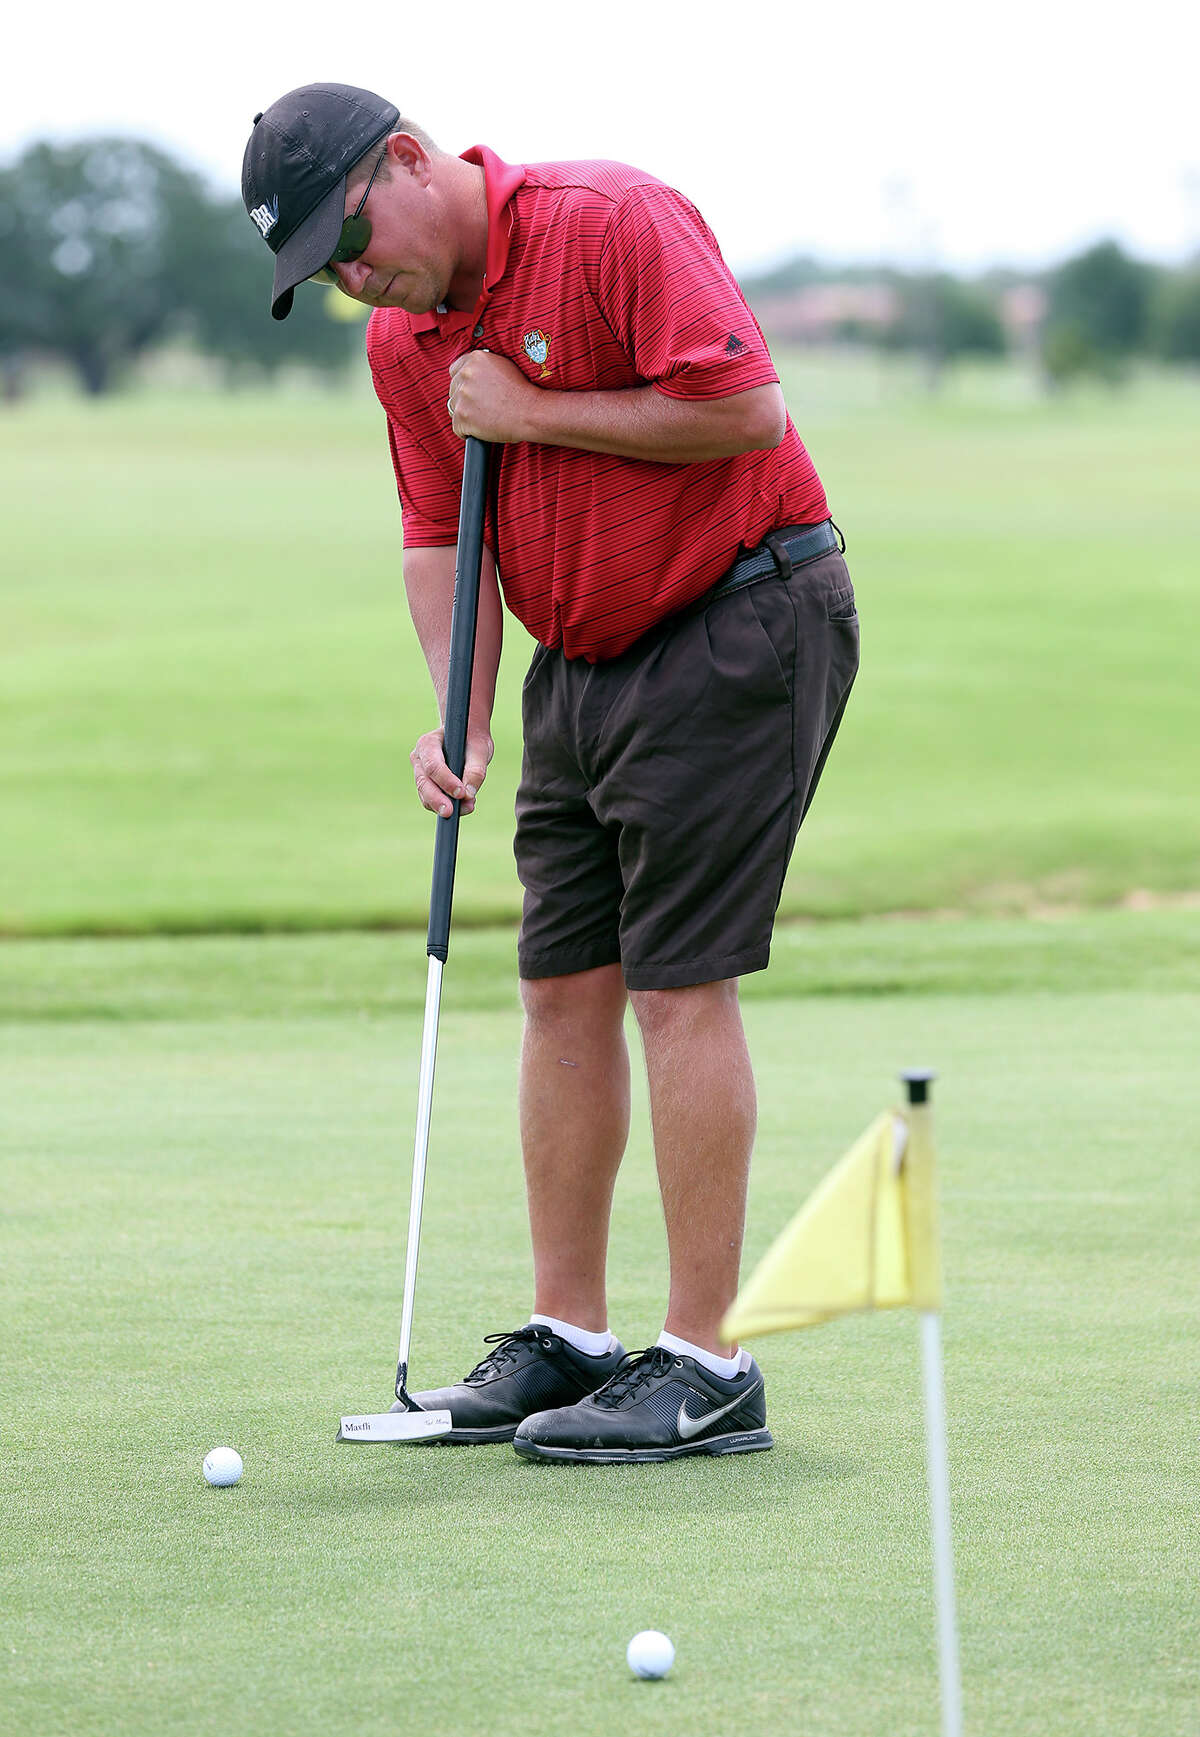 Adam Lowe practices with his long putter before teeing off for a round of golf at the Alsatian Golf Club in Castroville on June 12, 2013.